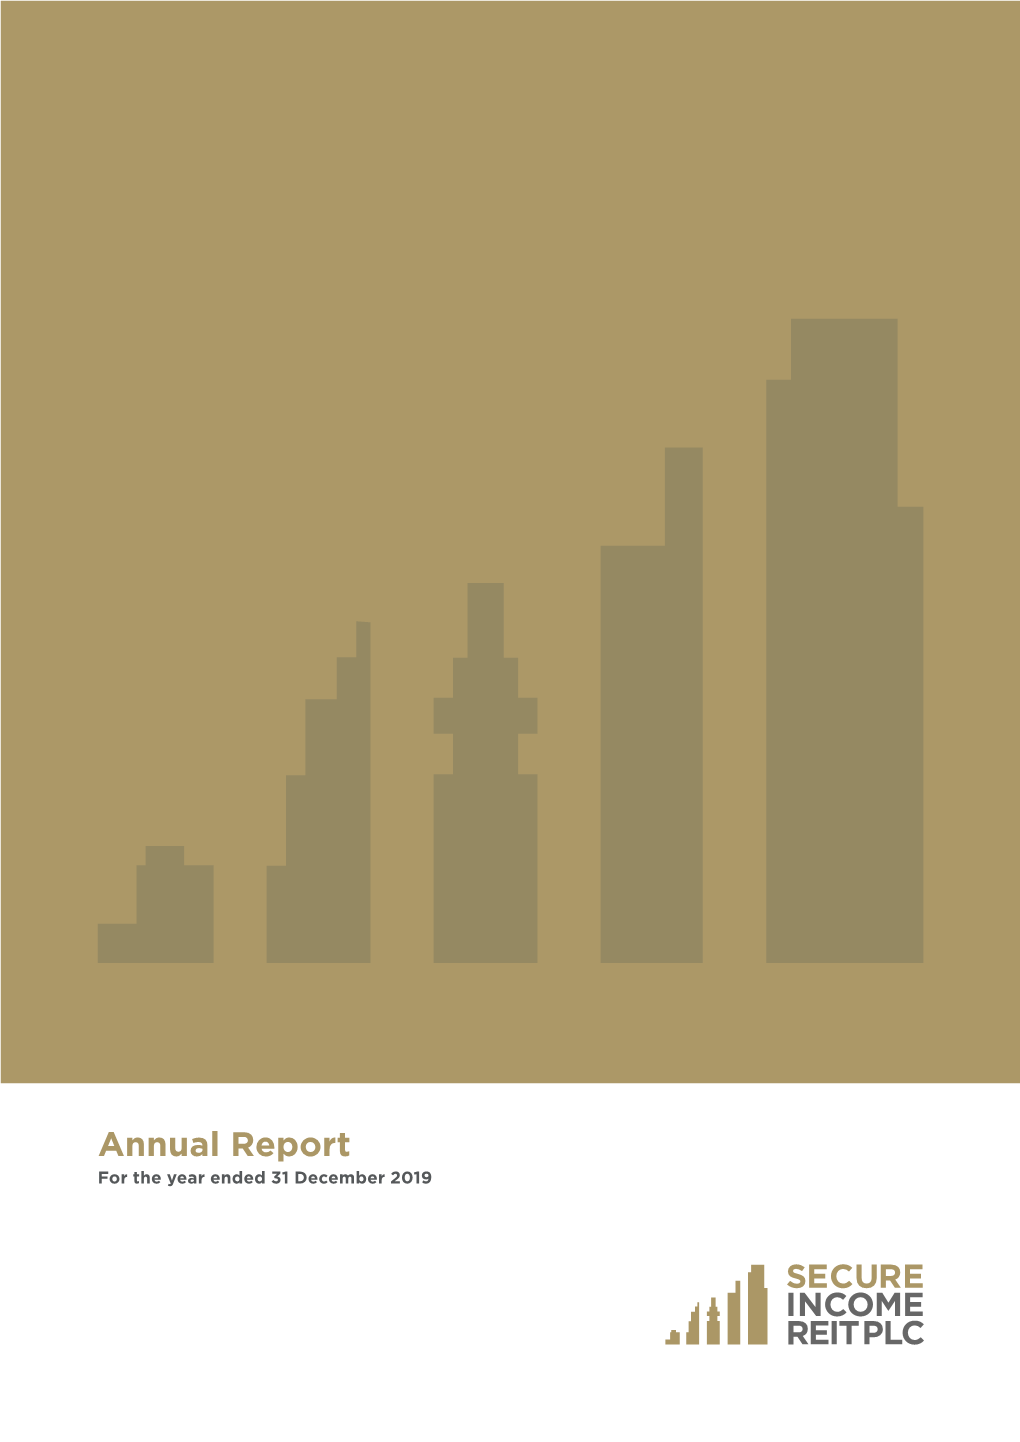 2019 Annual Report Is Distributed